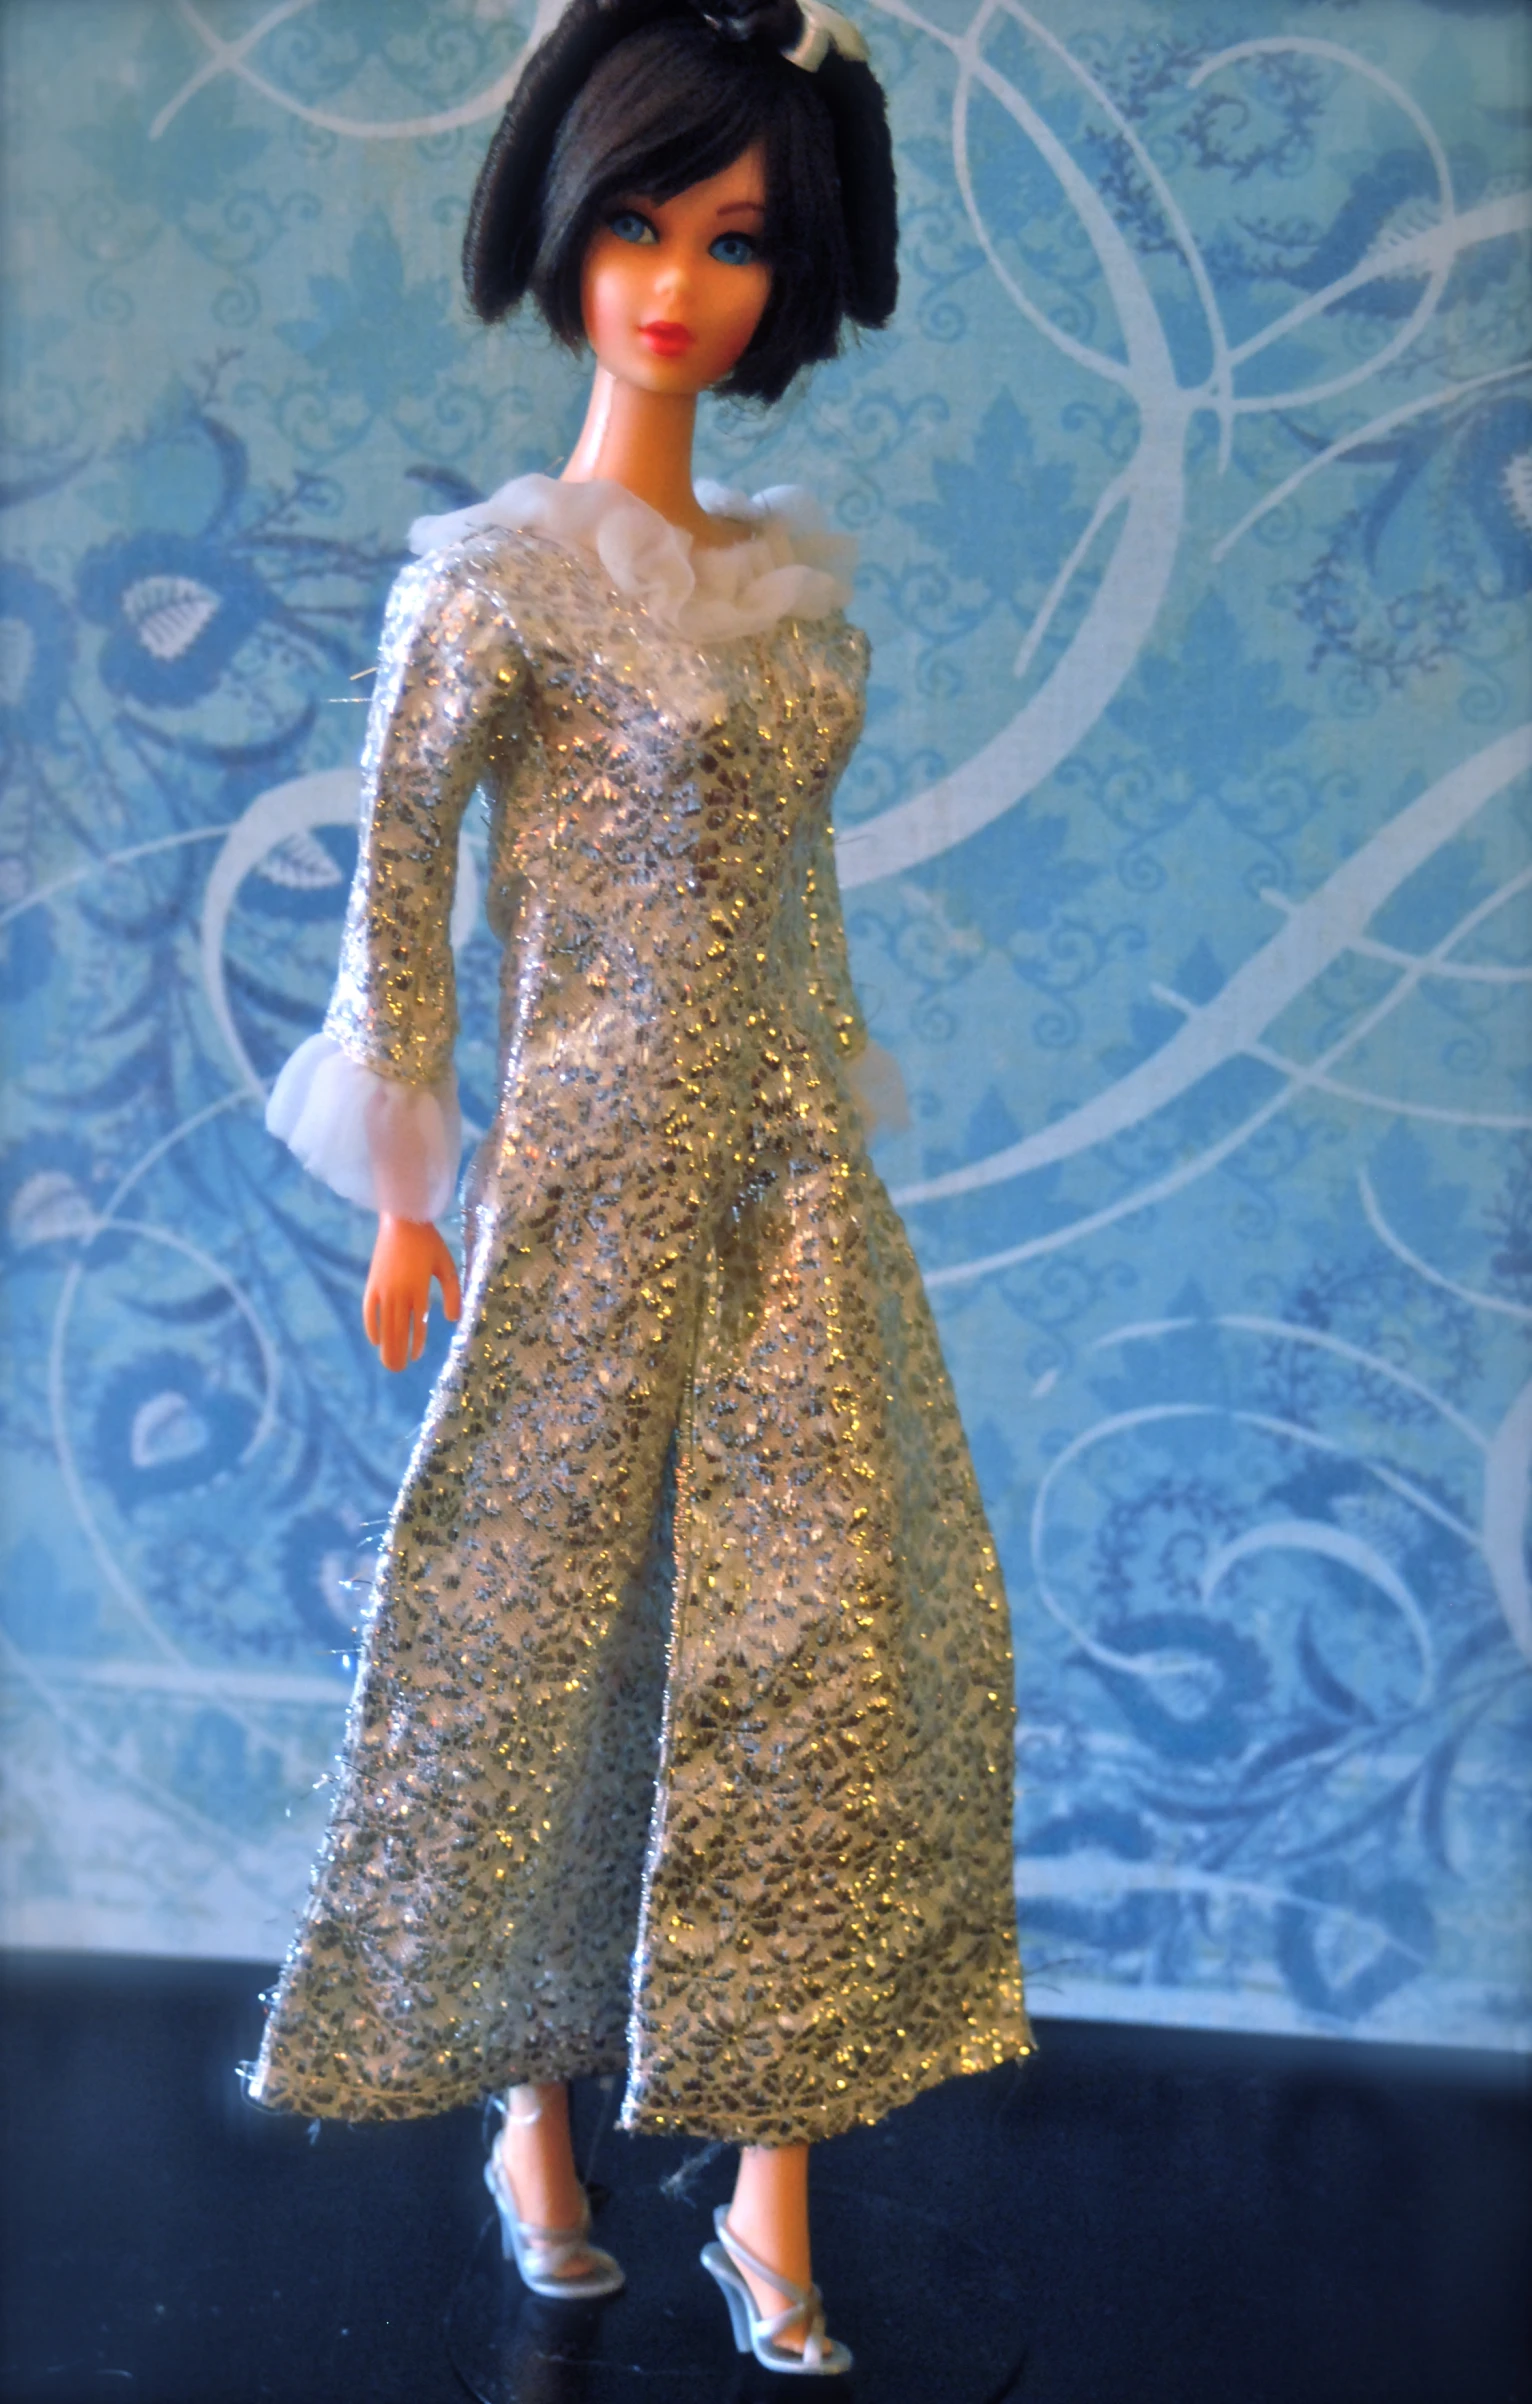 a doll is wearing a gold dress and white shoes